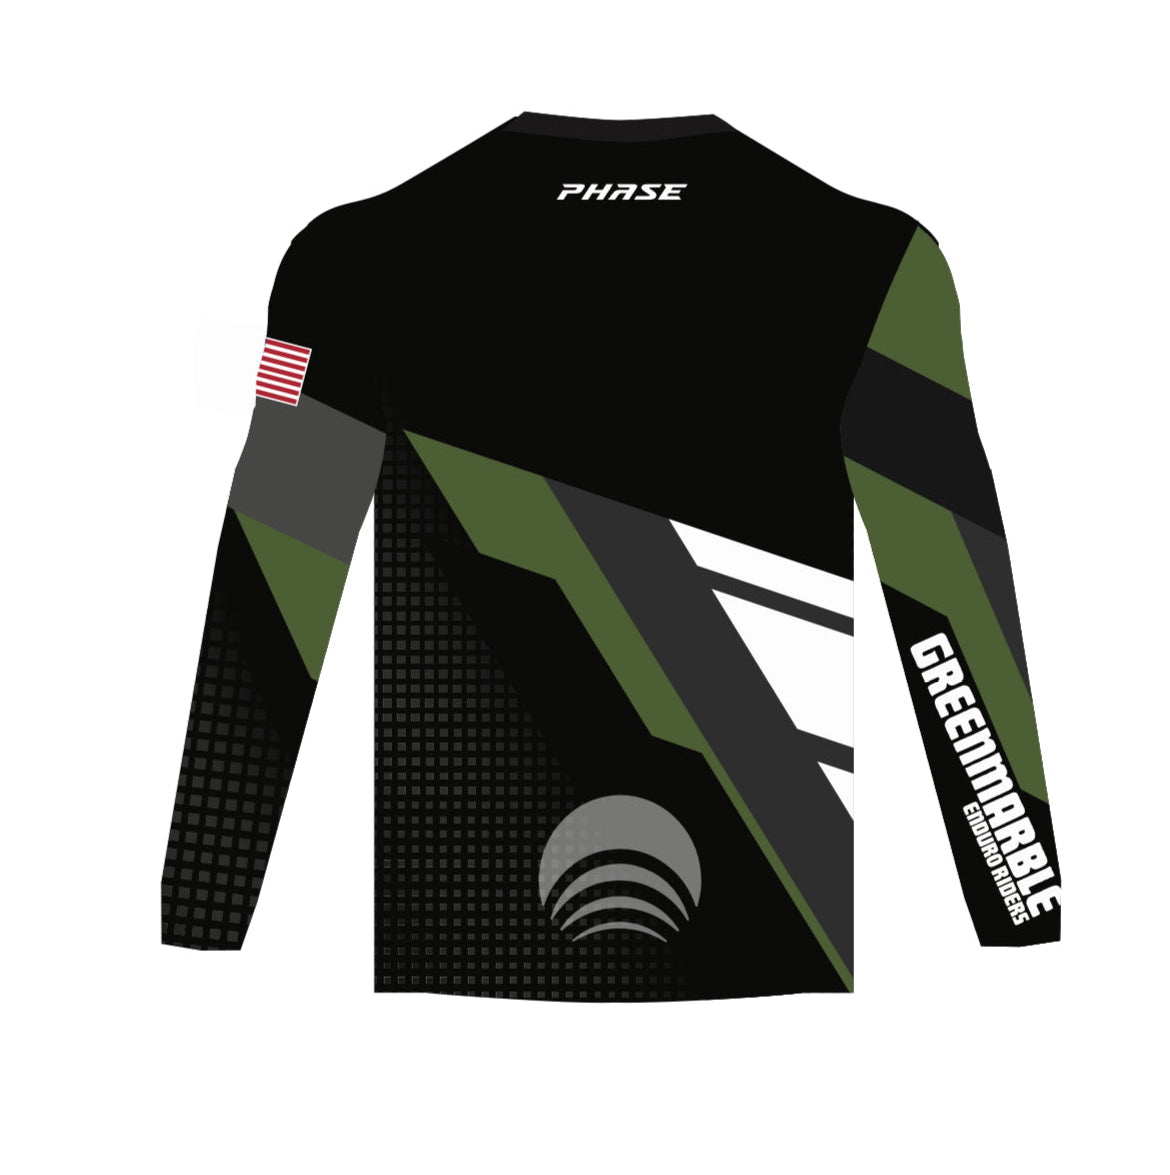 GMER CLUB RACE JERSEY    (VENTED VERSION) IN STOCK